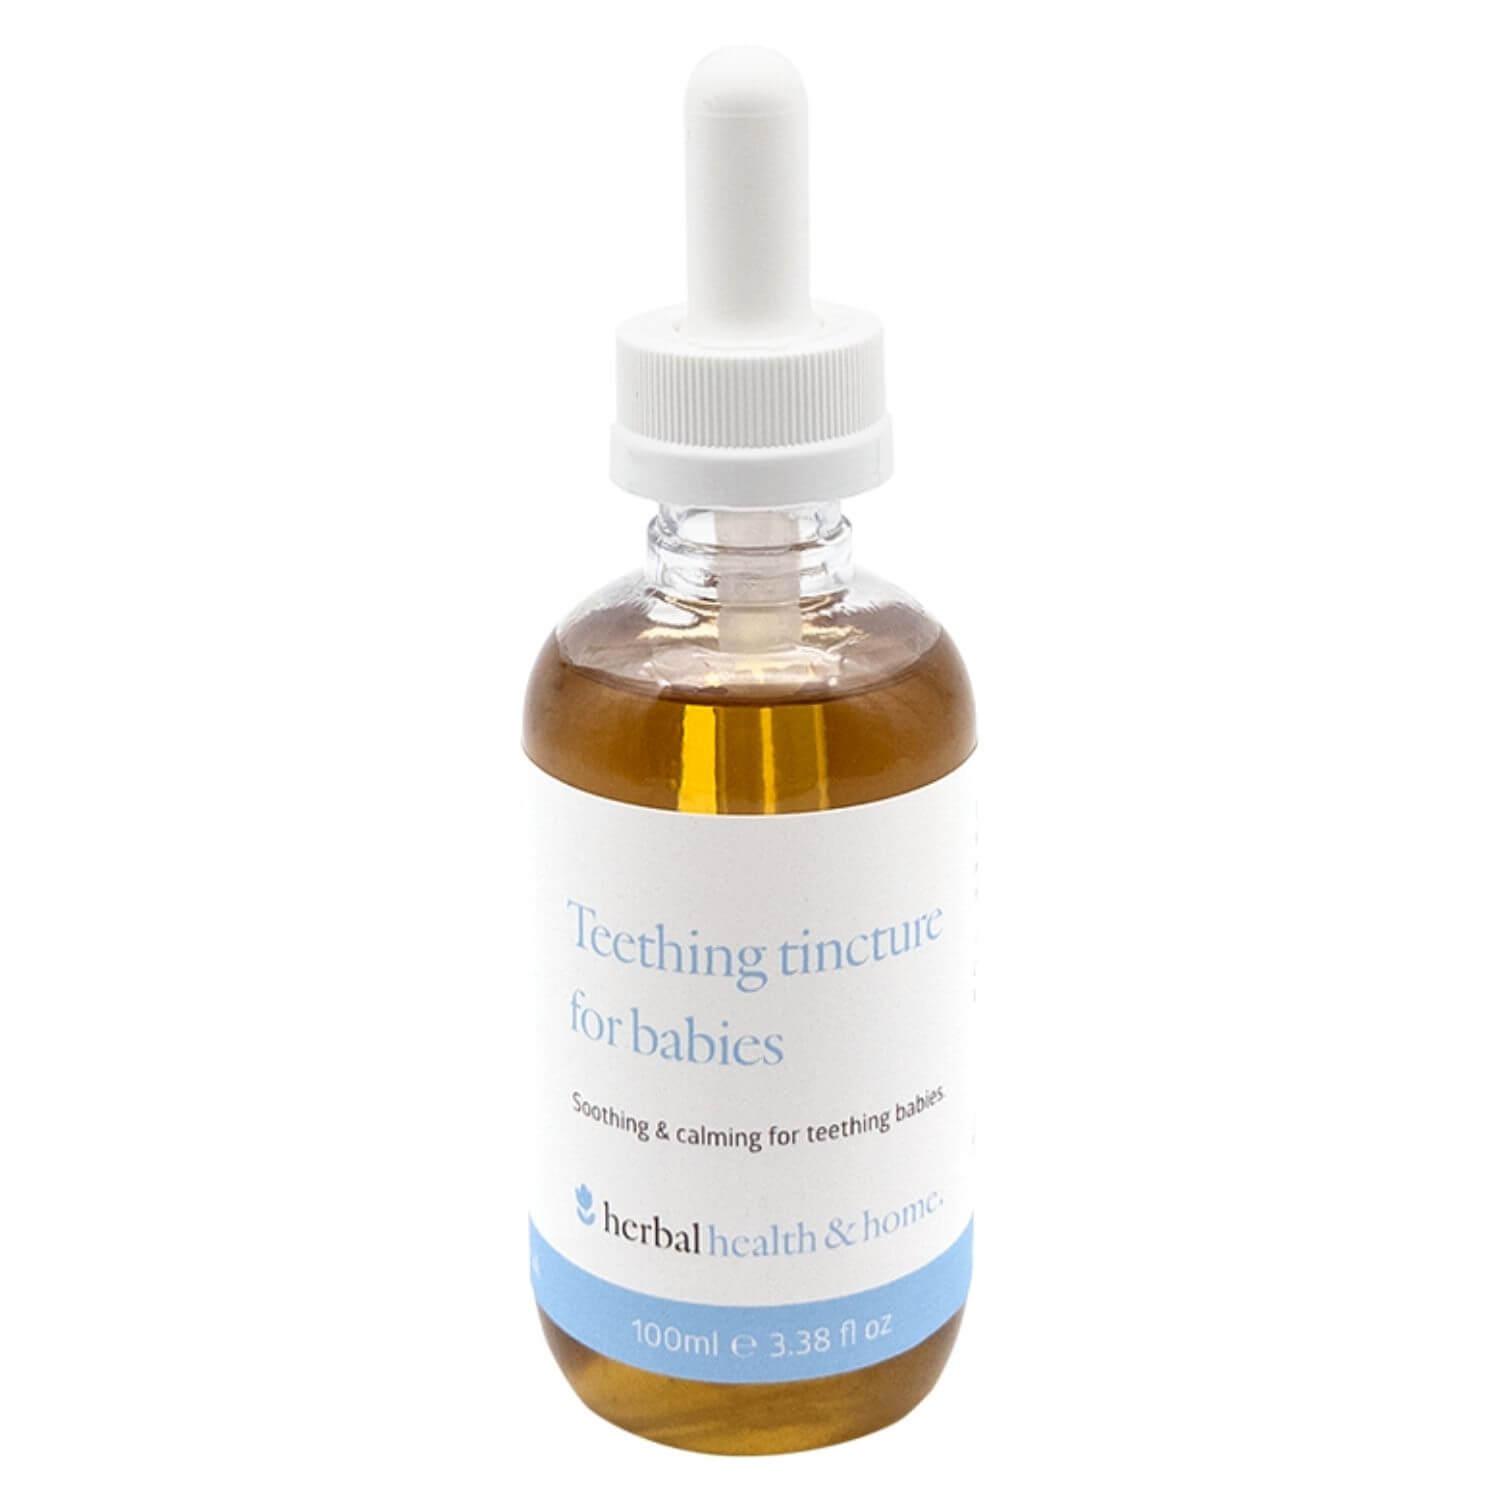 Teething Tincture For Babies | Herbal, Health & Home